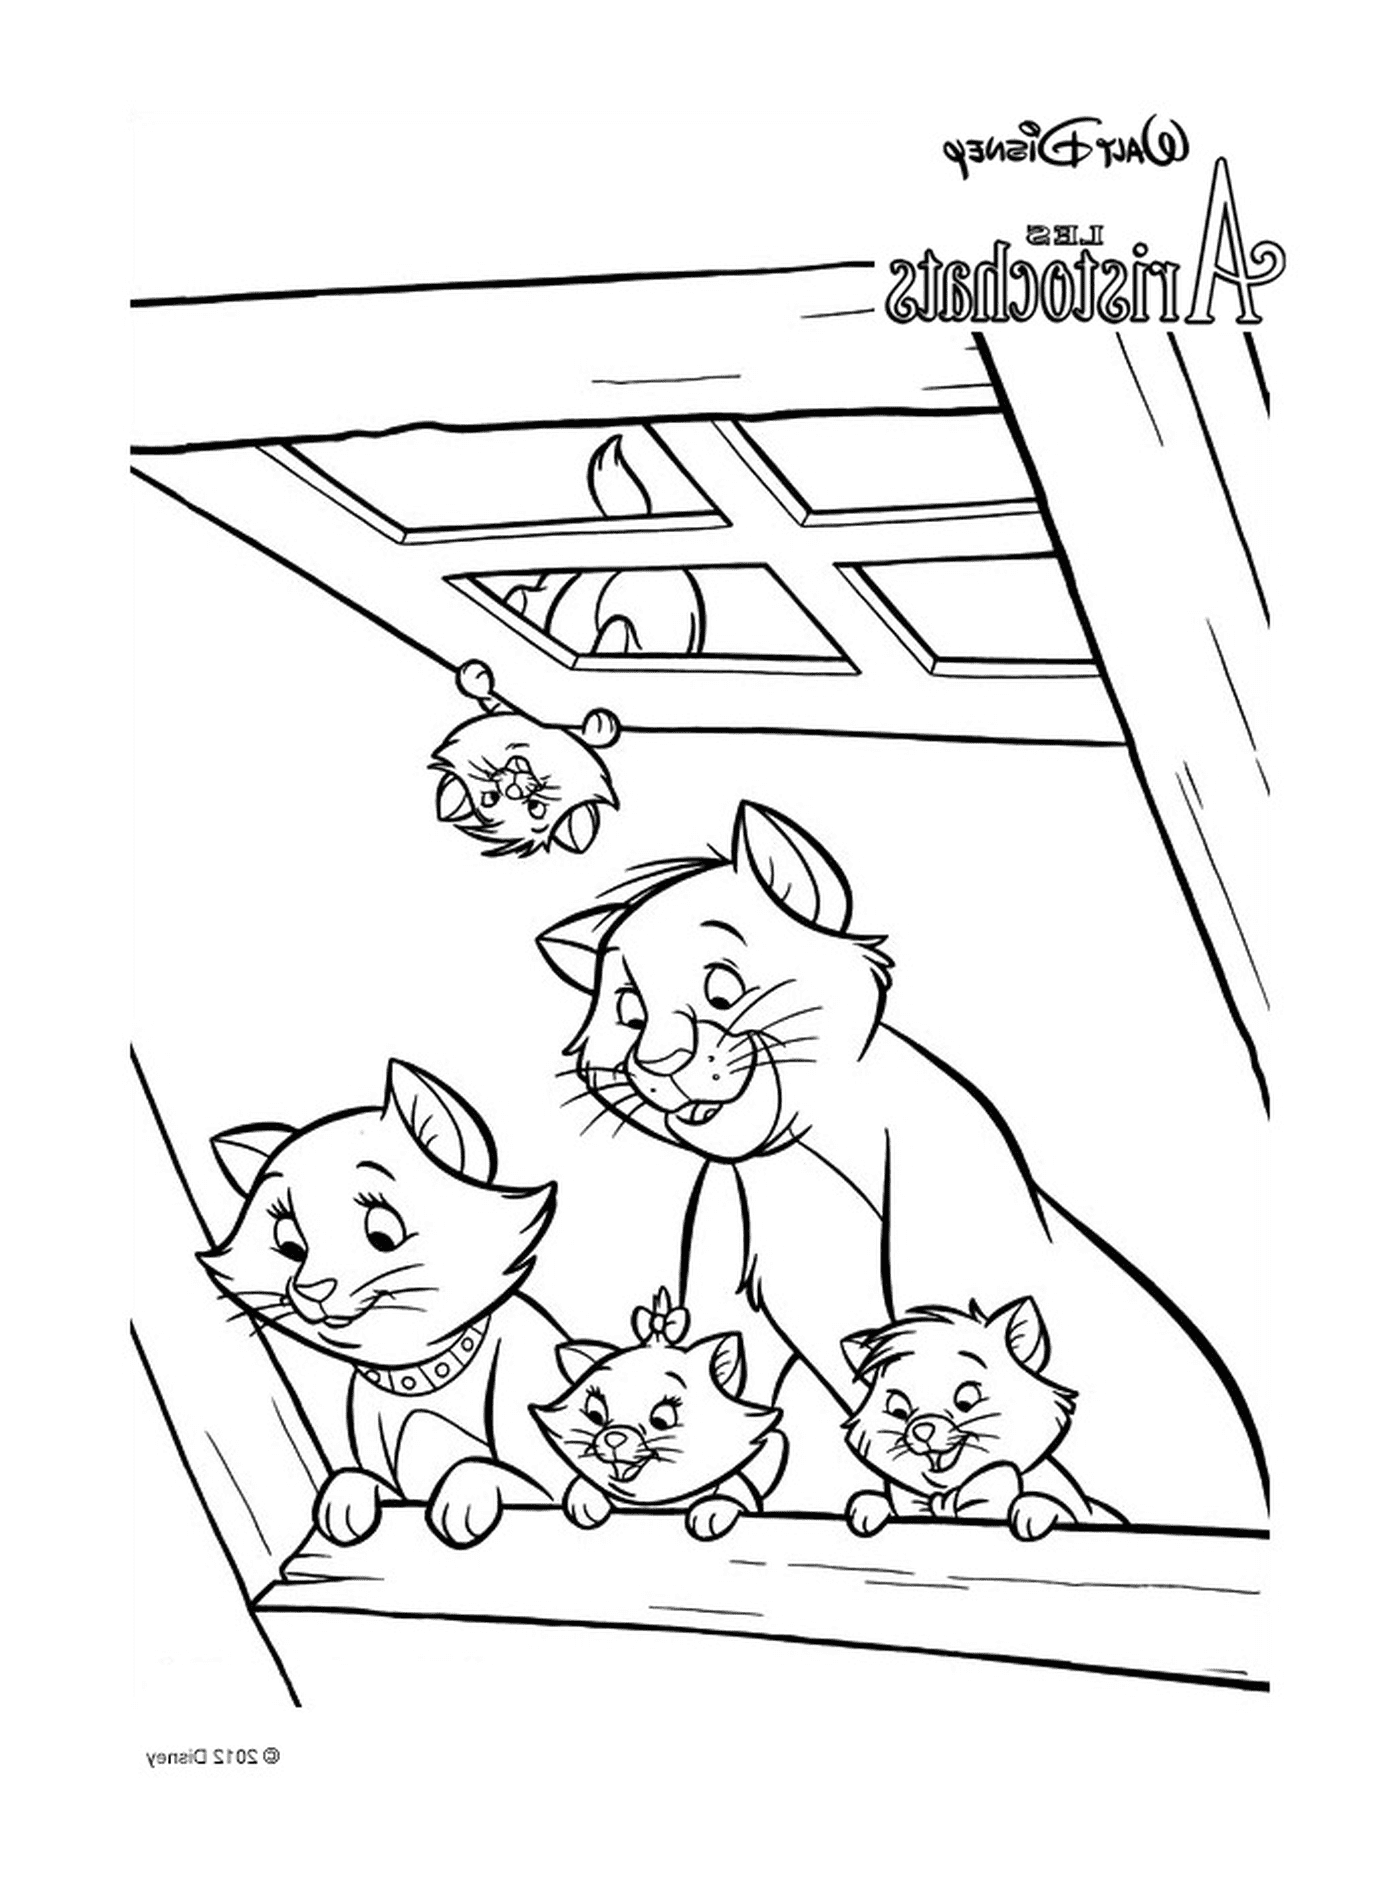  A group of cats sitting on the roof of a building 